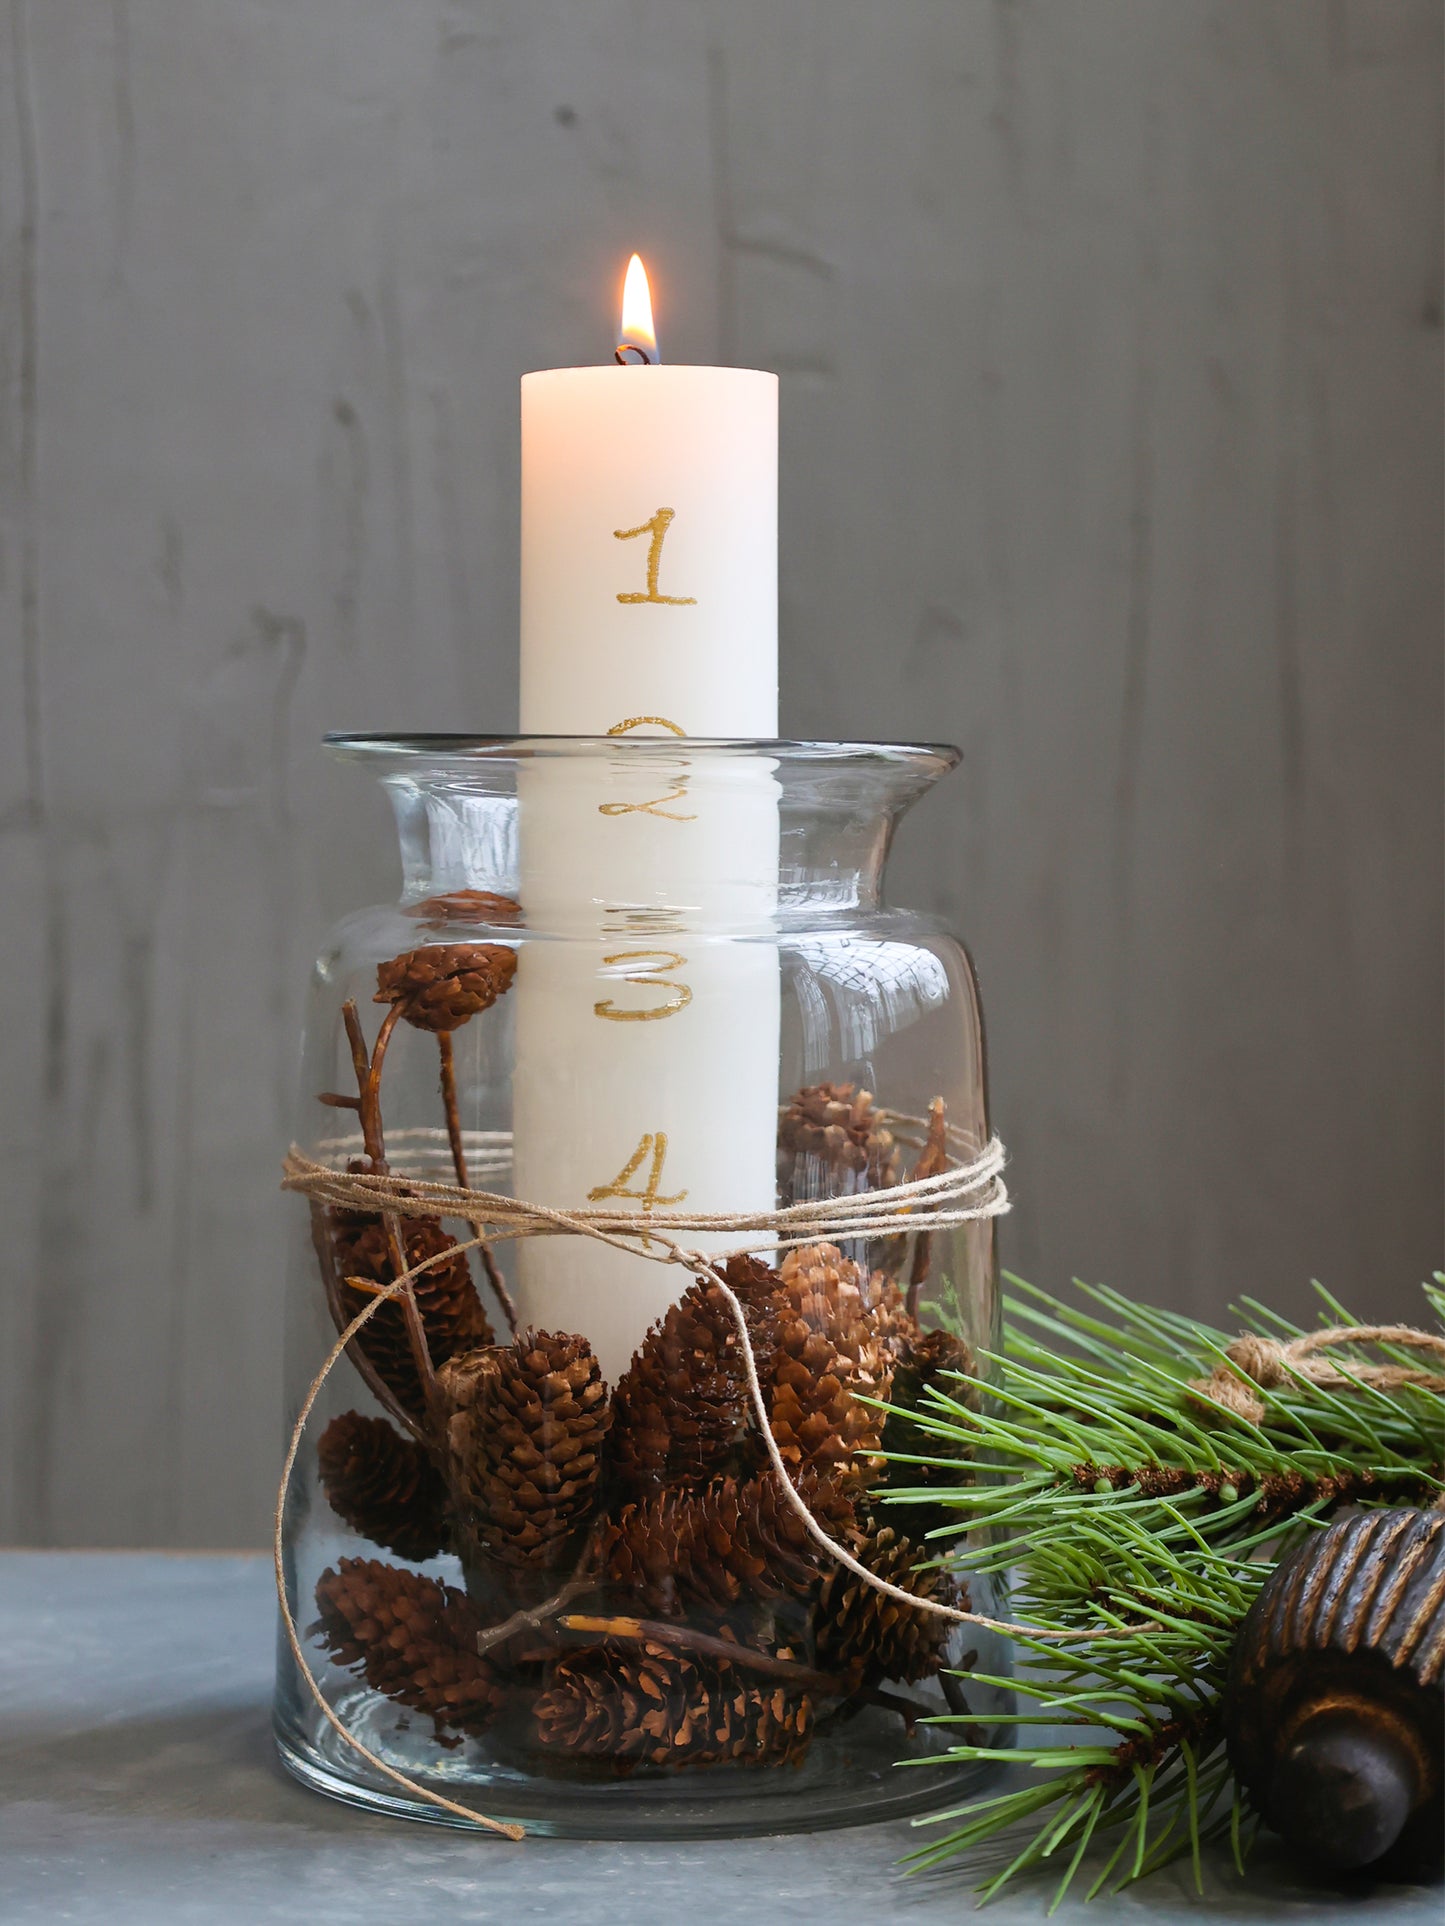 Advent Candle with Gold Numbers 1-4